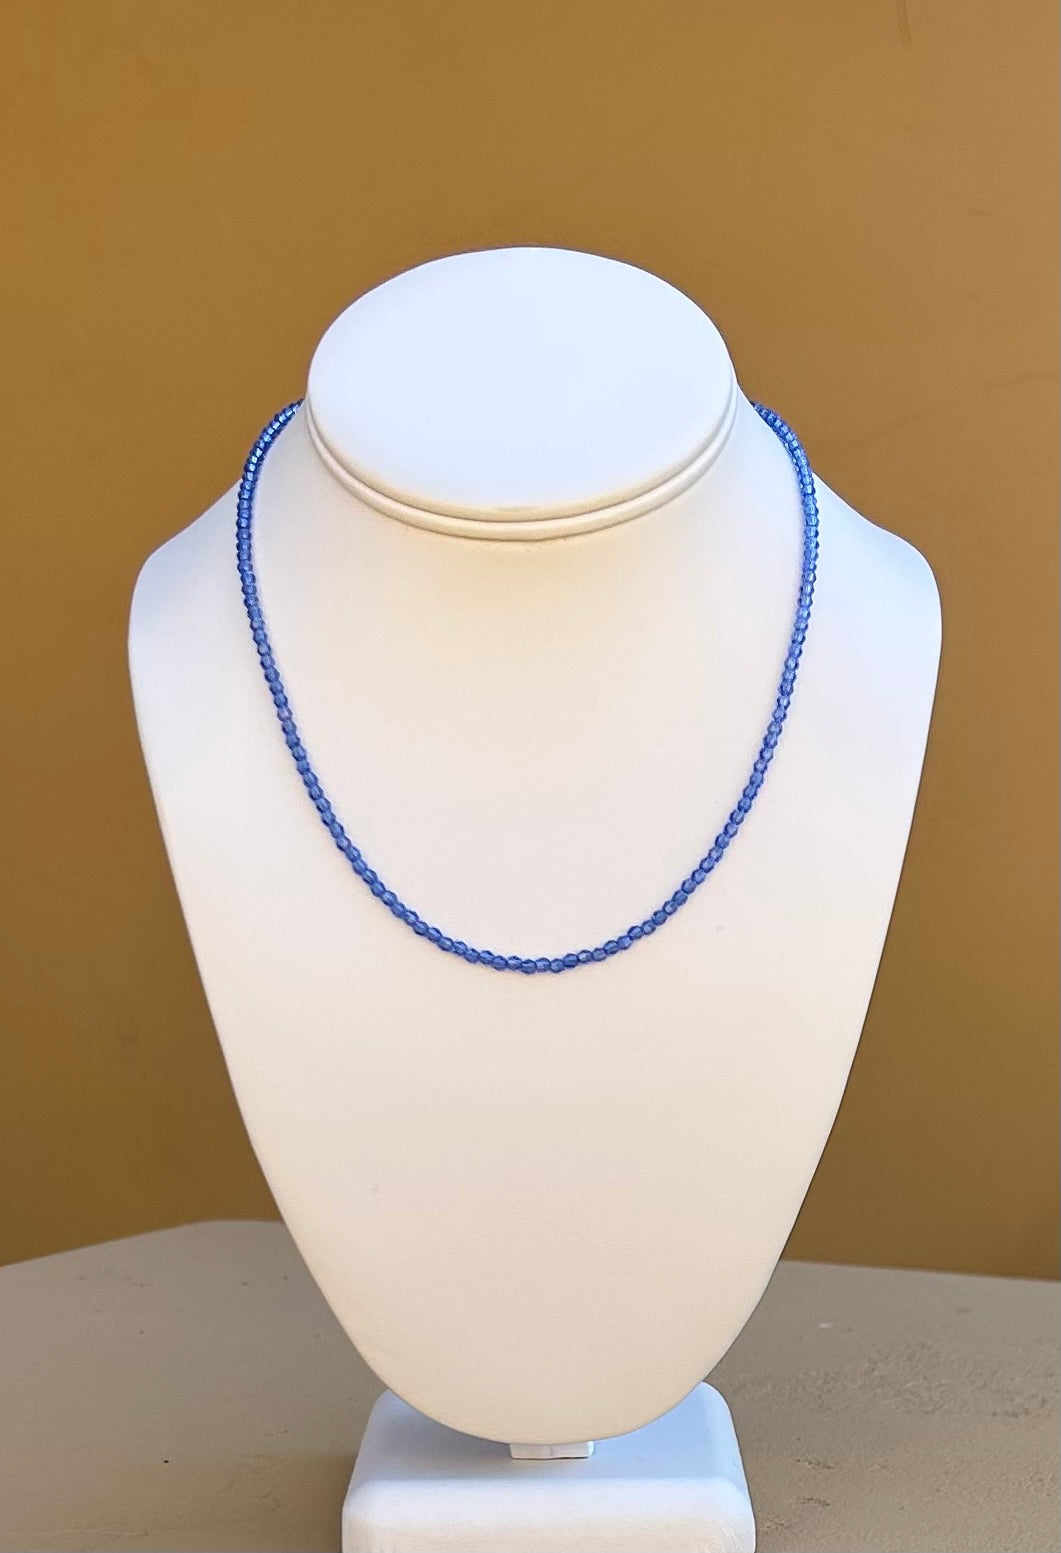 Necklace - Blue sapphire Swarovski crystal necklace with 14K gold filled toggle